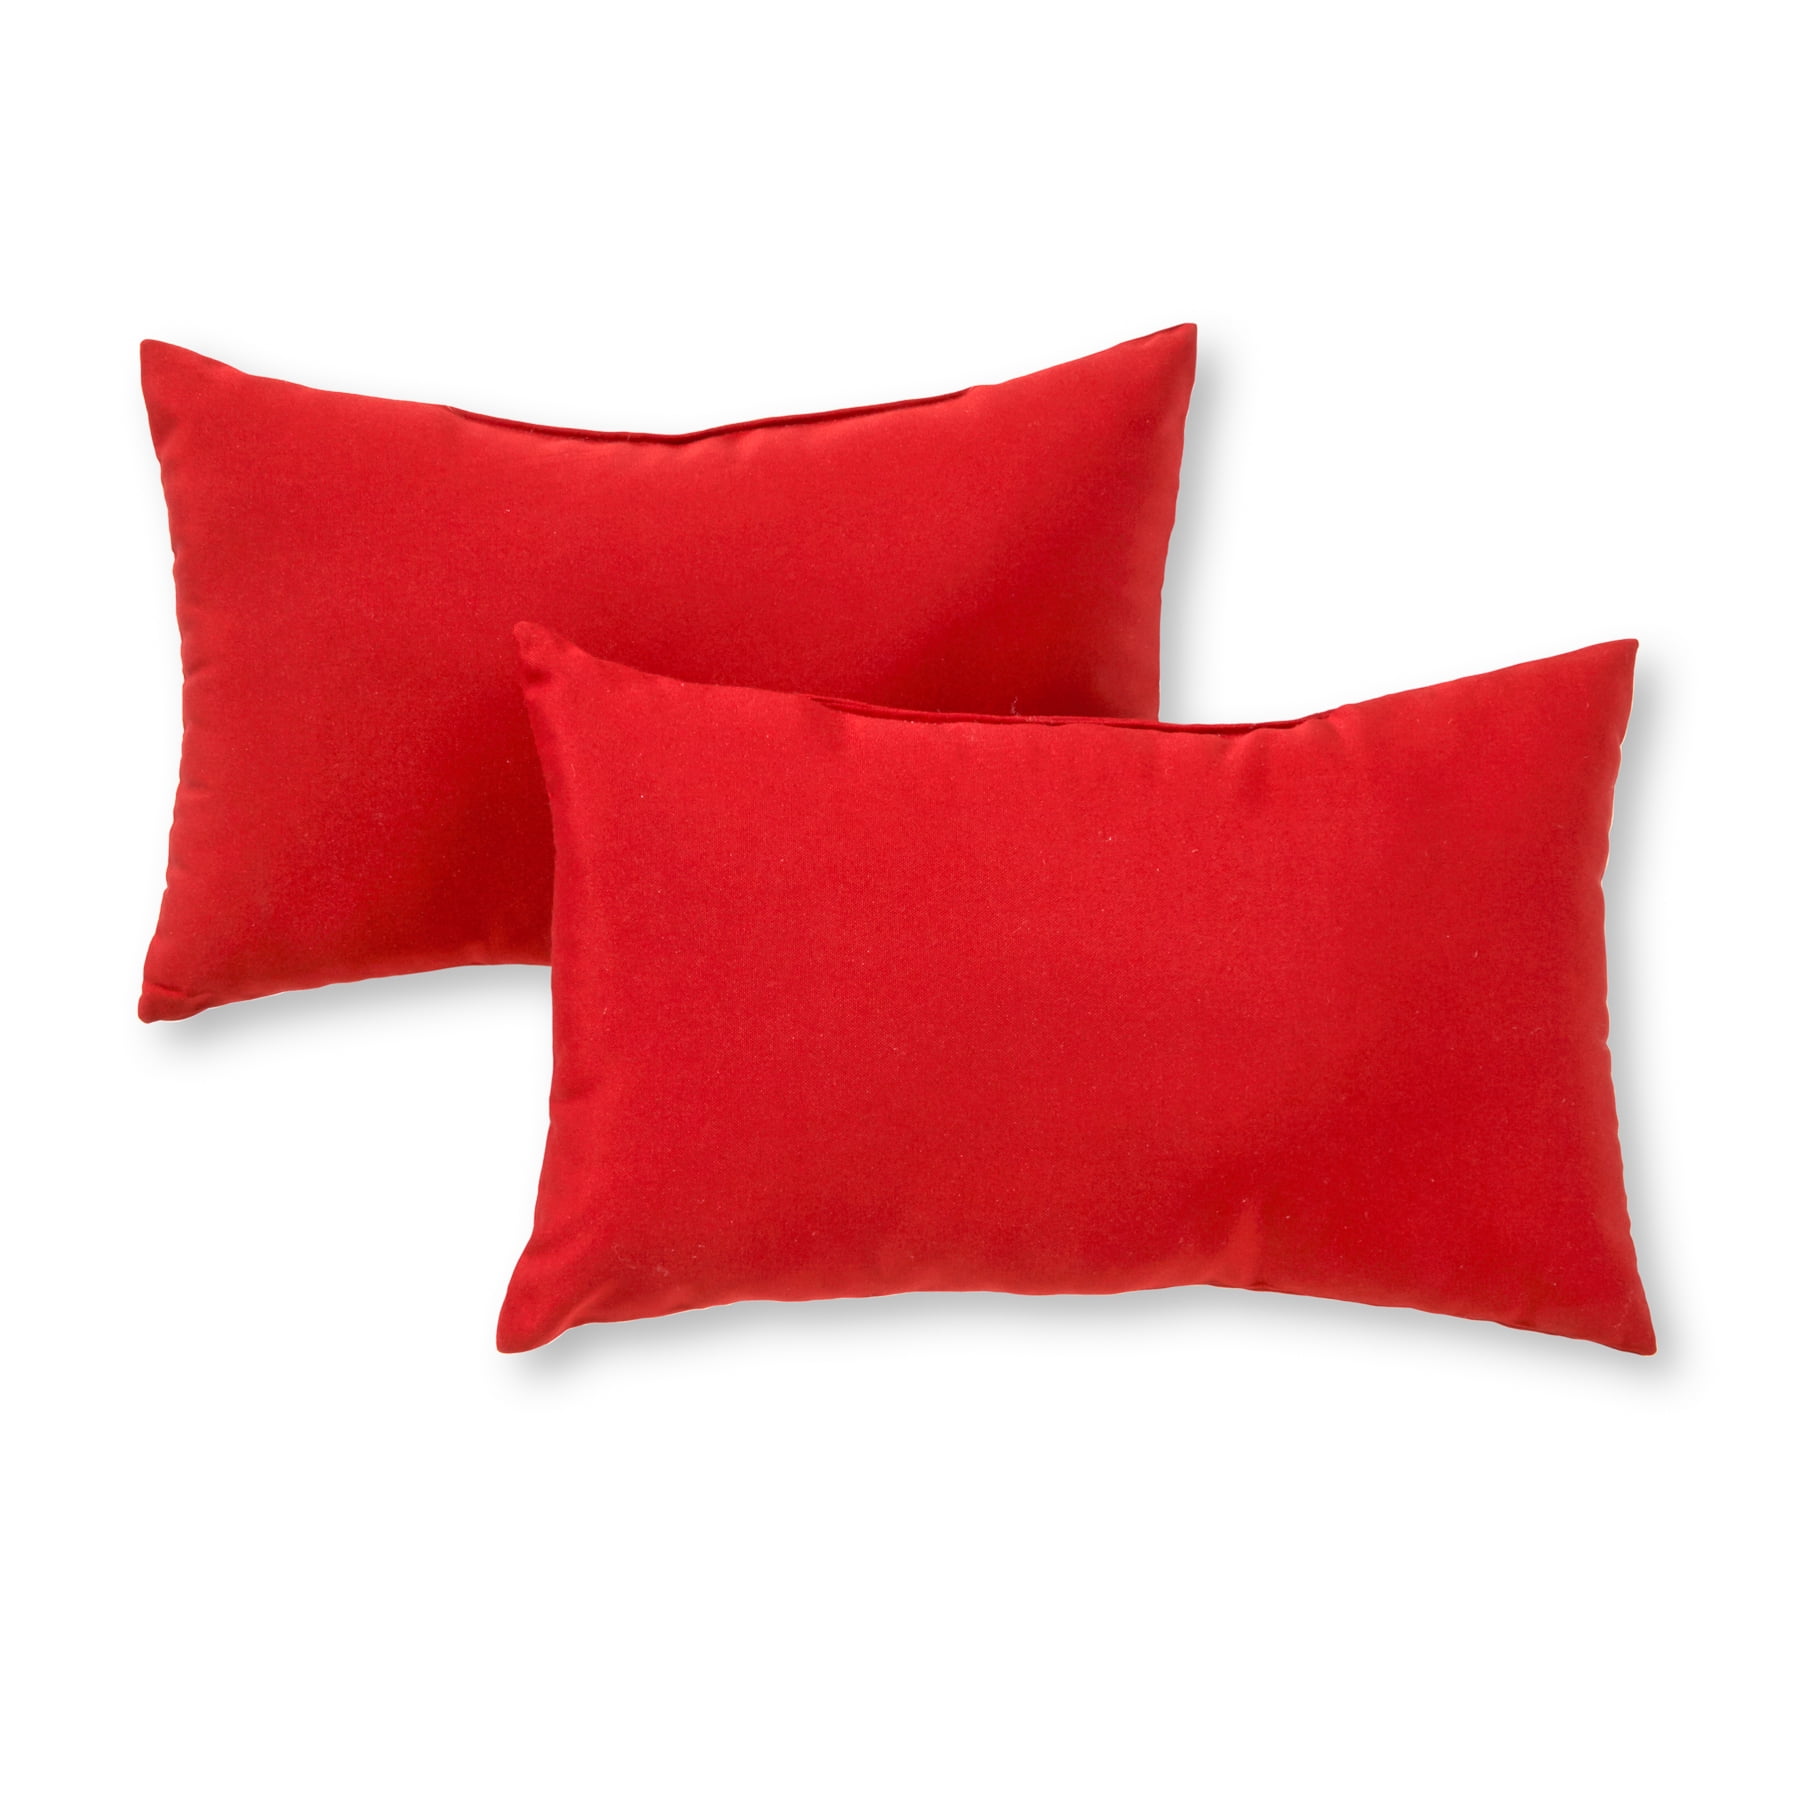 Pillow Perfect Outdoor New Geo Corded Oversized Rectangular Throw Pillow (Set of 2) Red